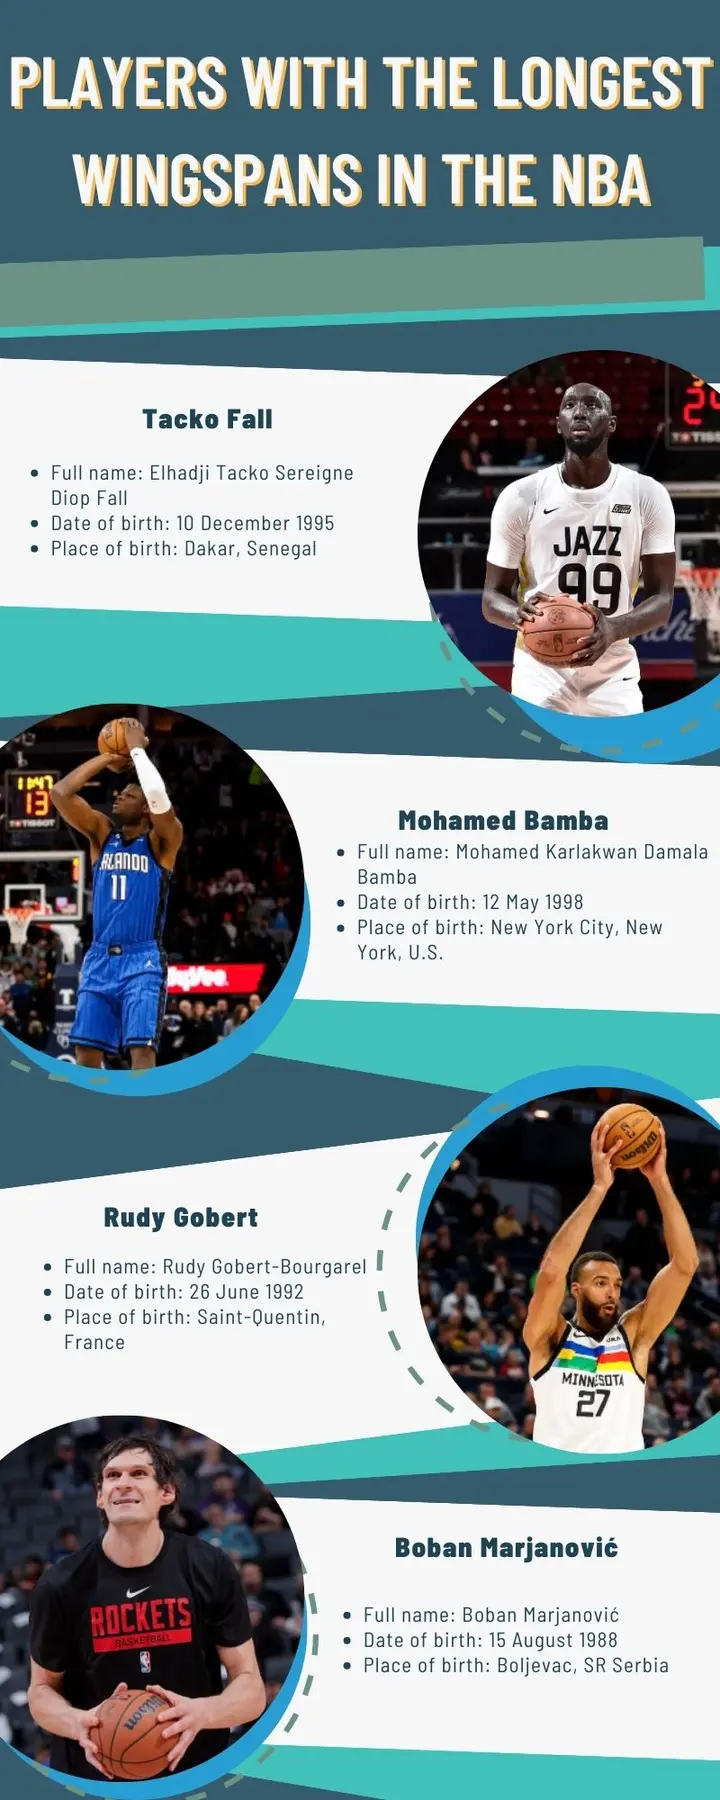 Players with the longest wingspans in the NBA